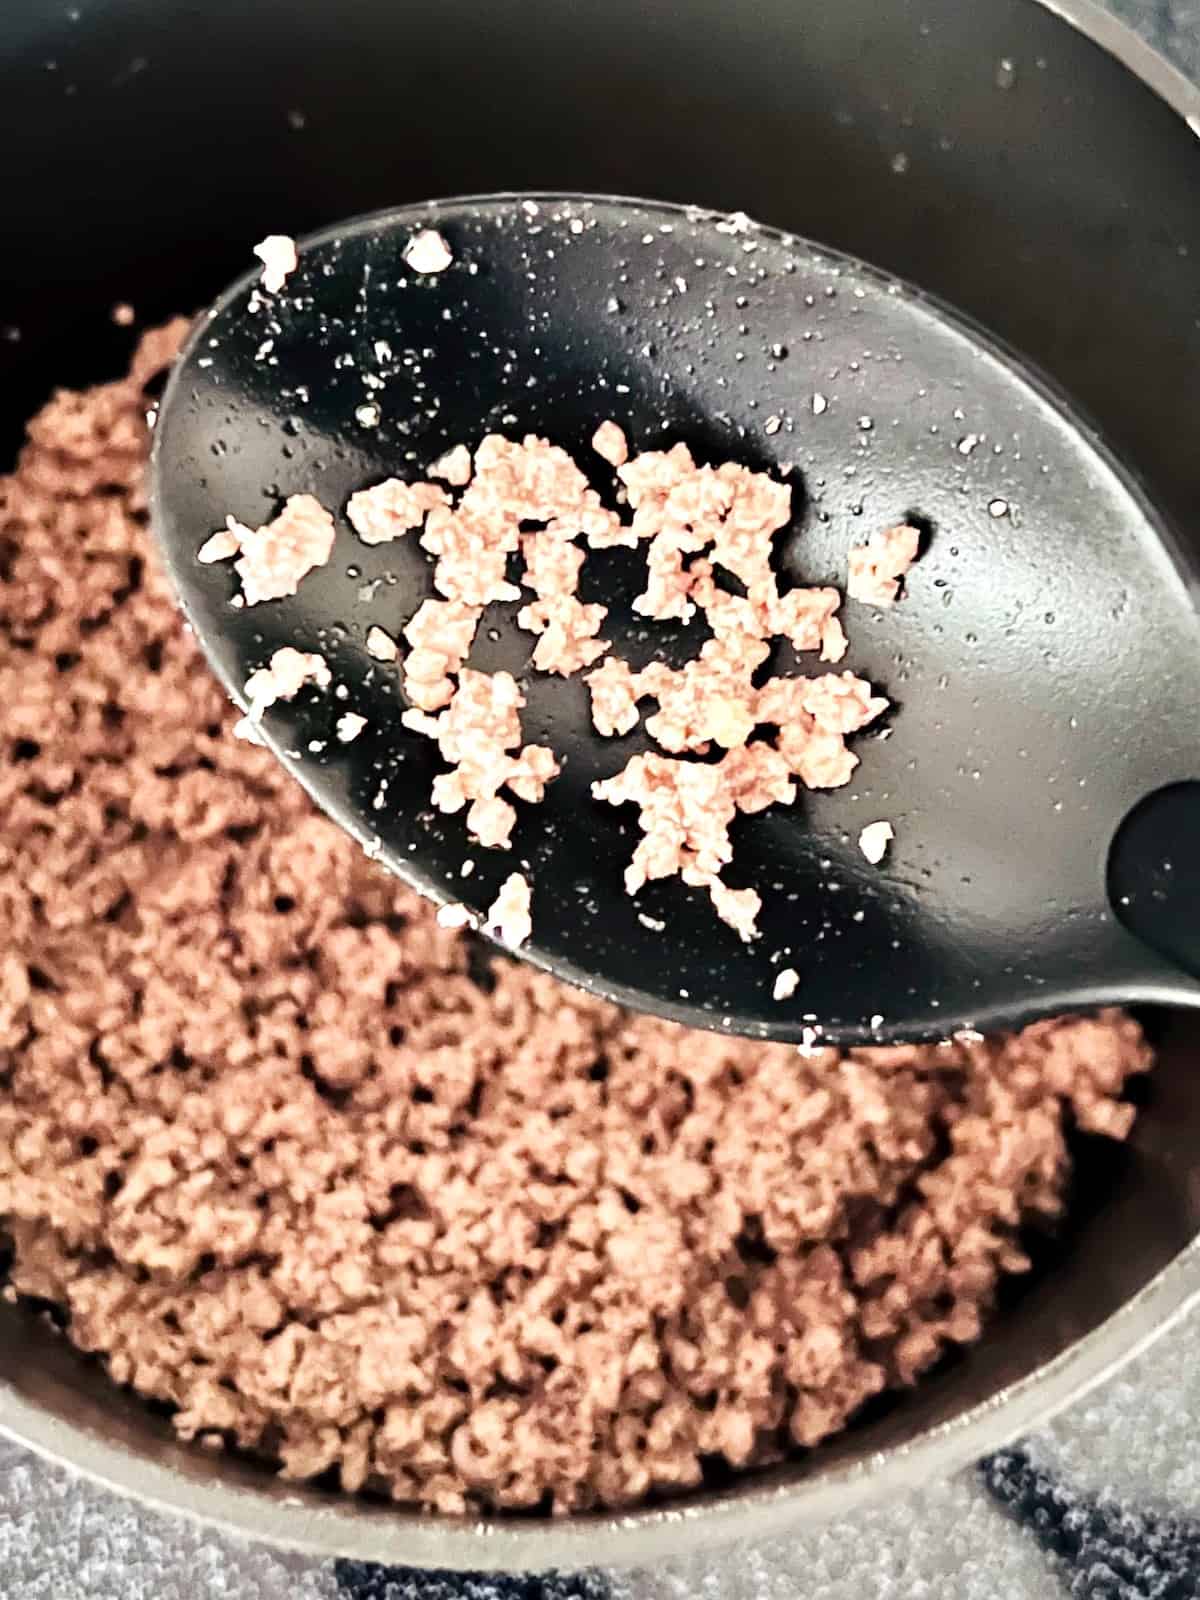 Ground beef in the pot cooked and a spoon showing finely ground pieces.